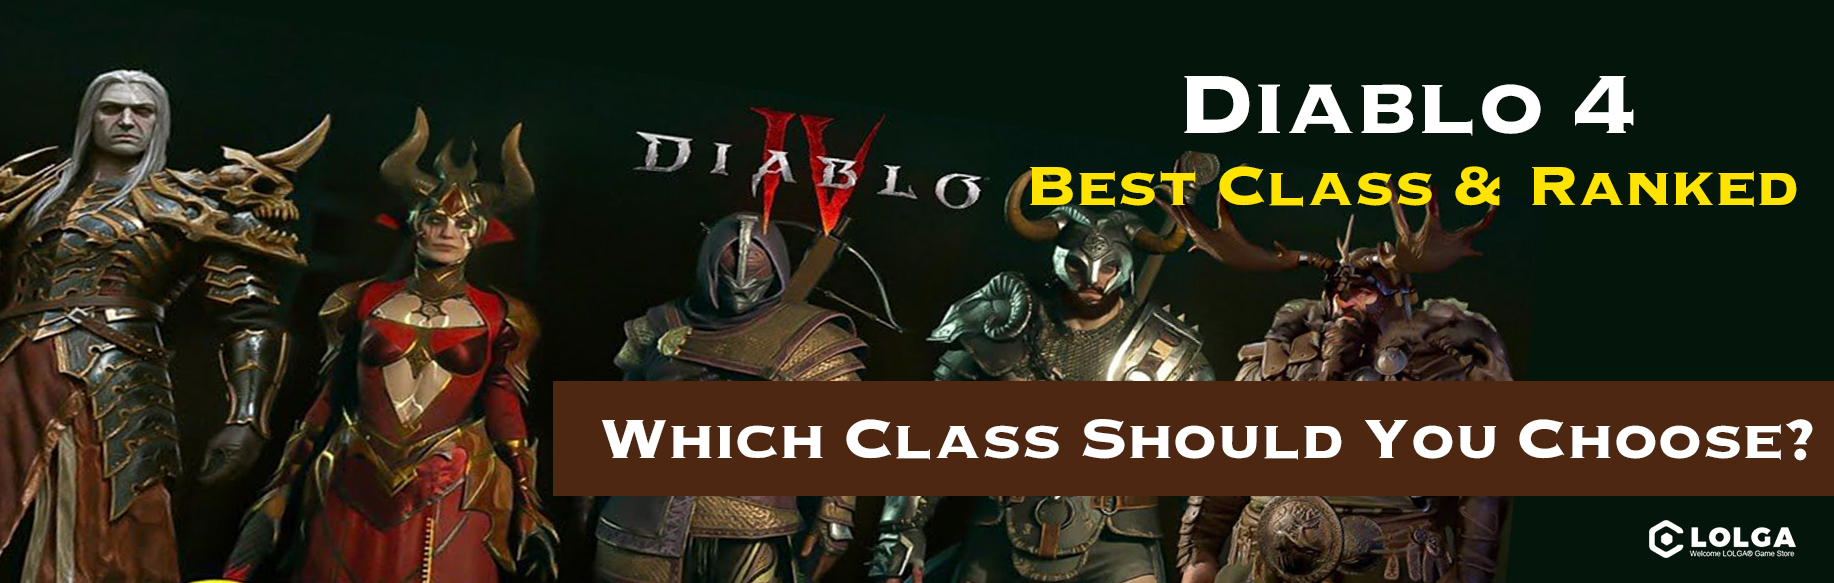 Diablo 4 Best Class and Ranked: Which Class Should You Choose?